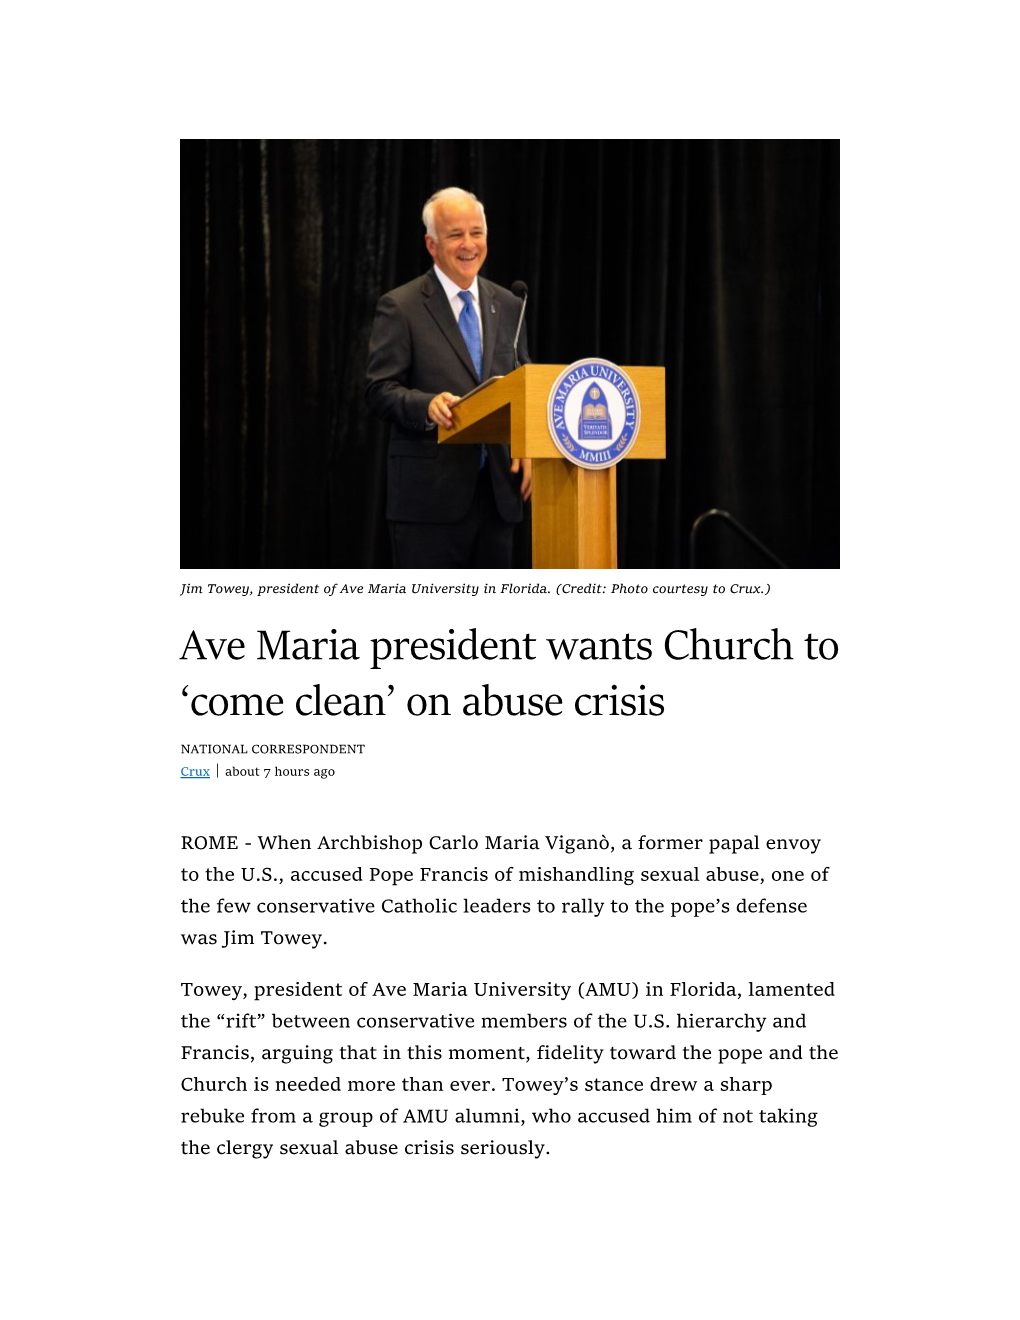 Ave Maria President Wants Church to 'Come Clean' on Abuse Crisis